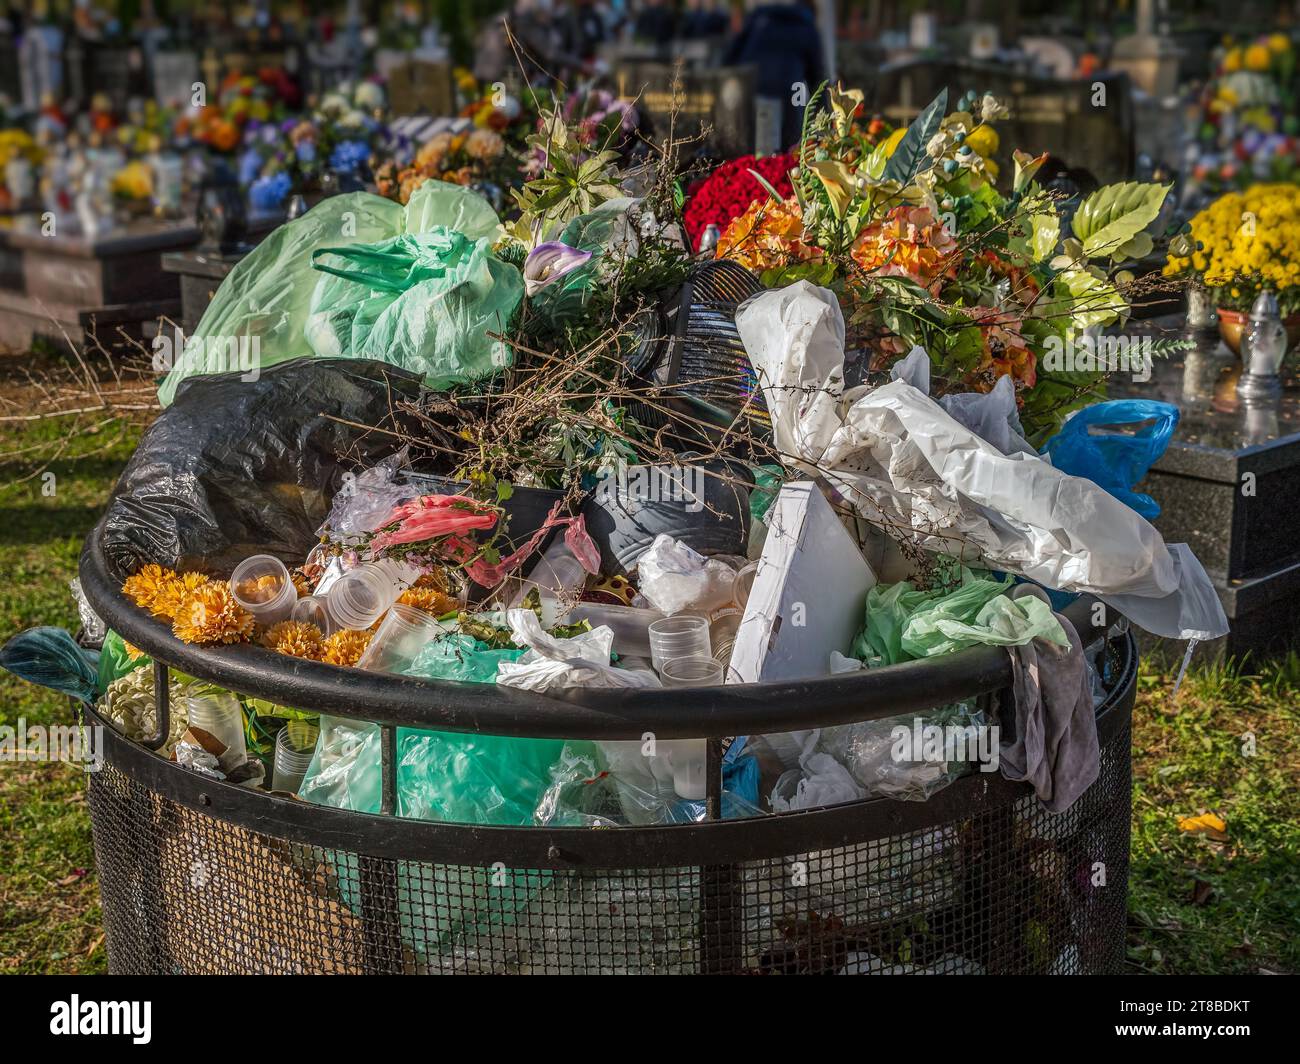 Cemetary trash bin filled with tombstone waste decorations and rubbish Stock Photo